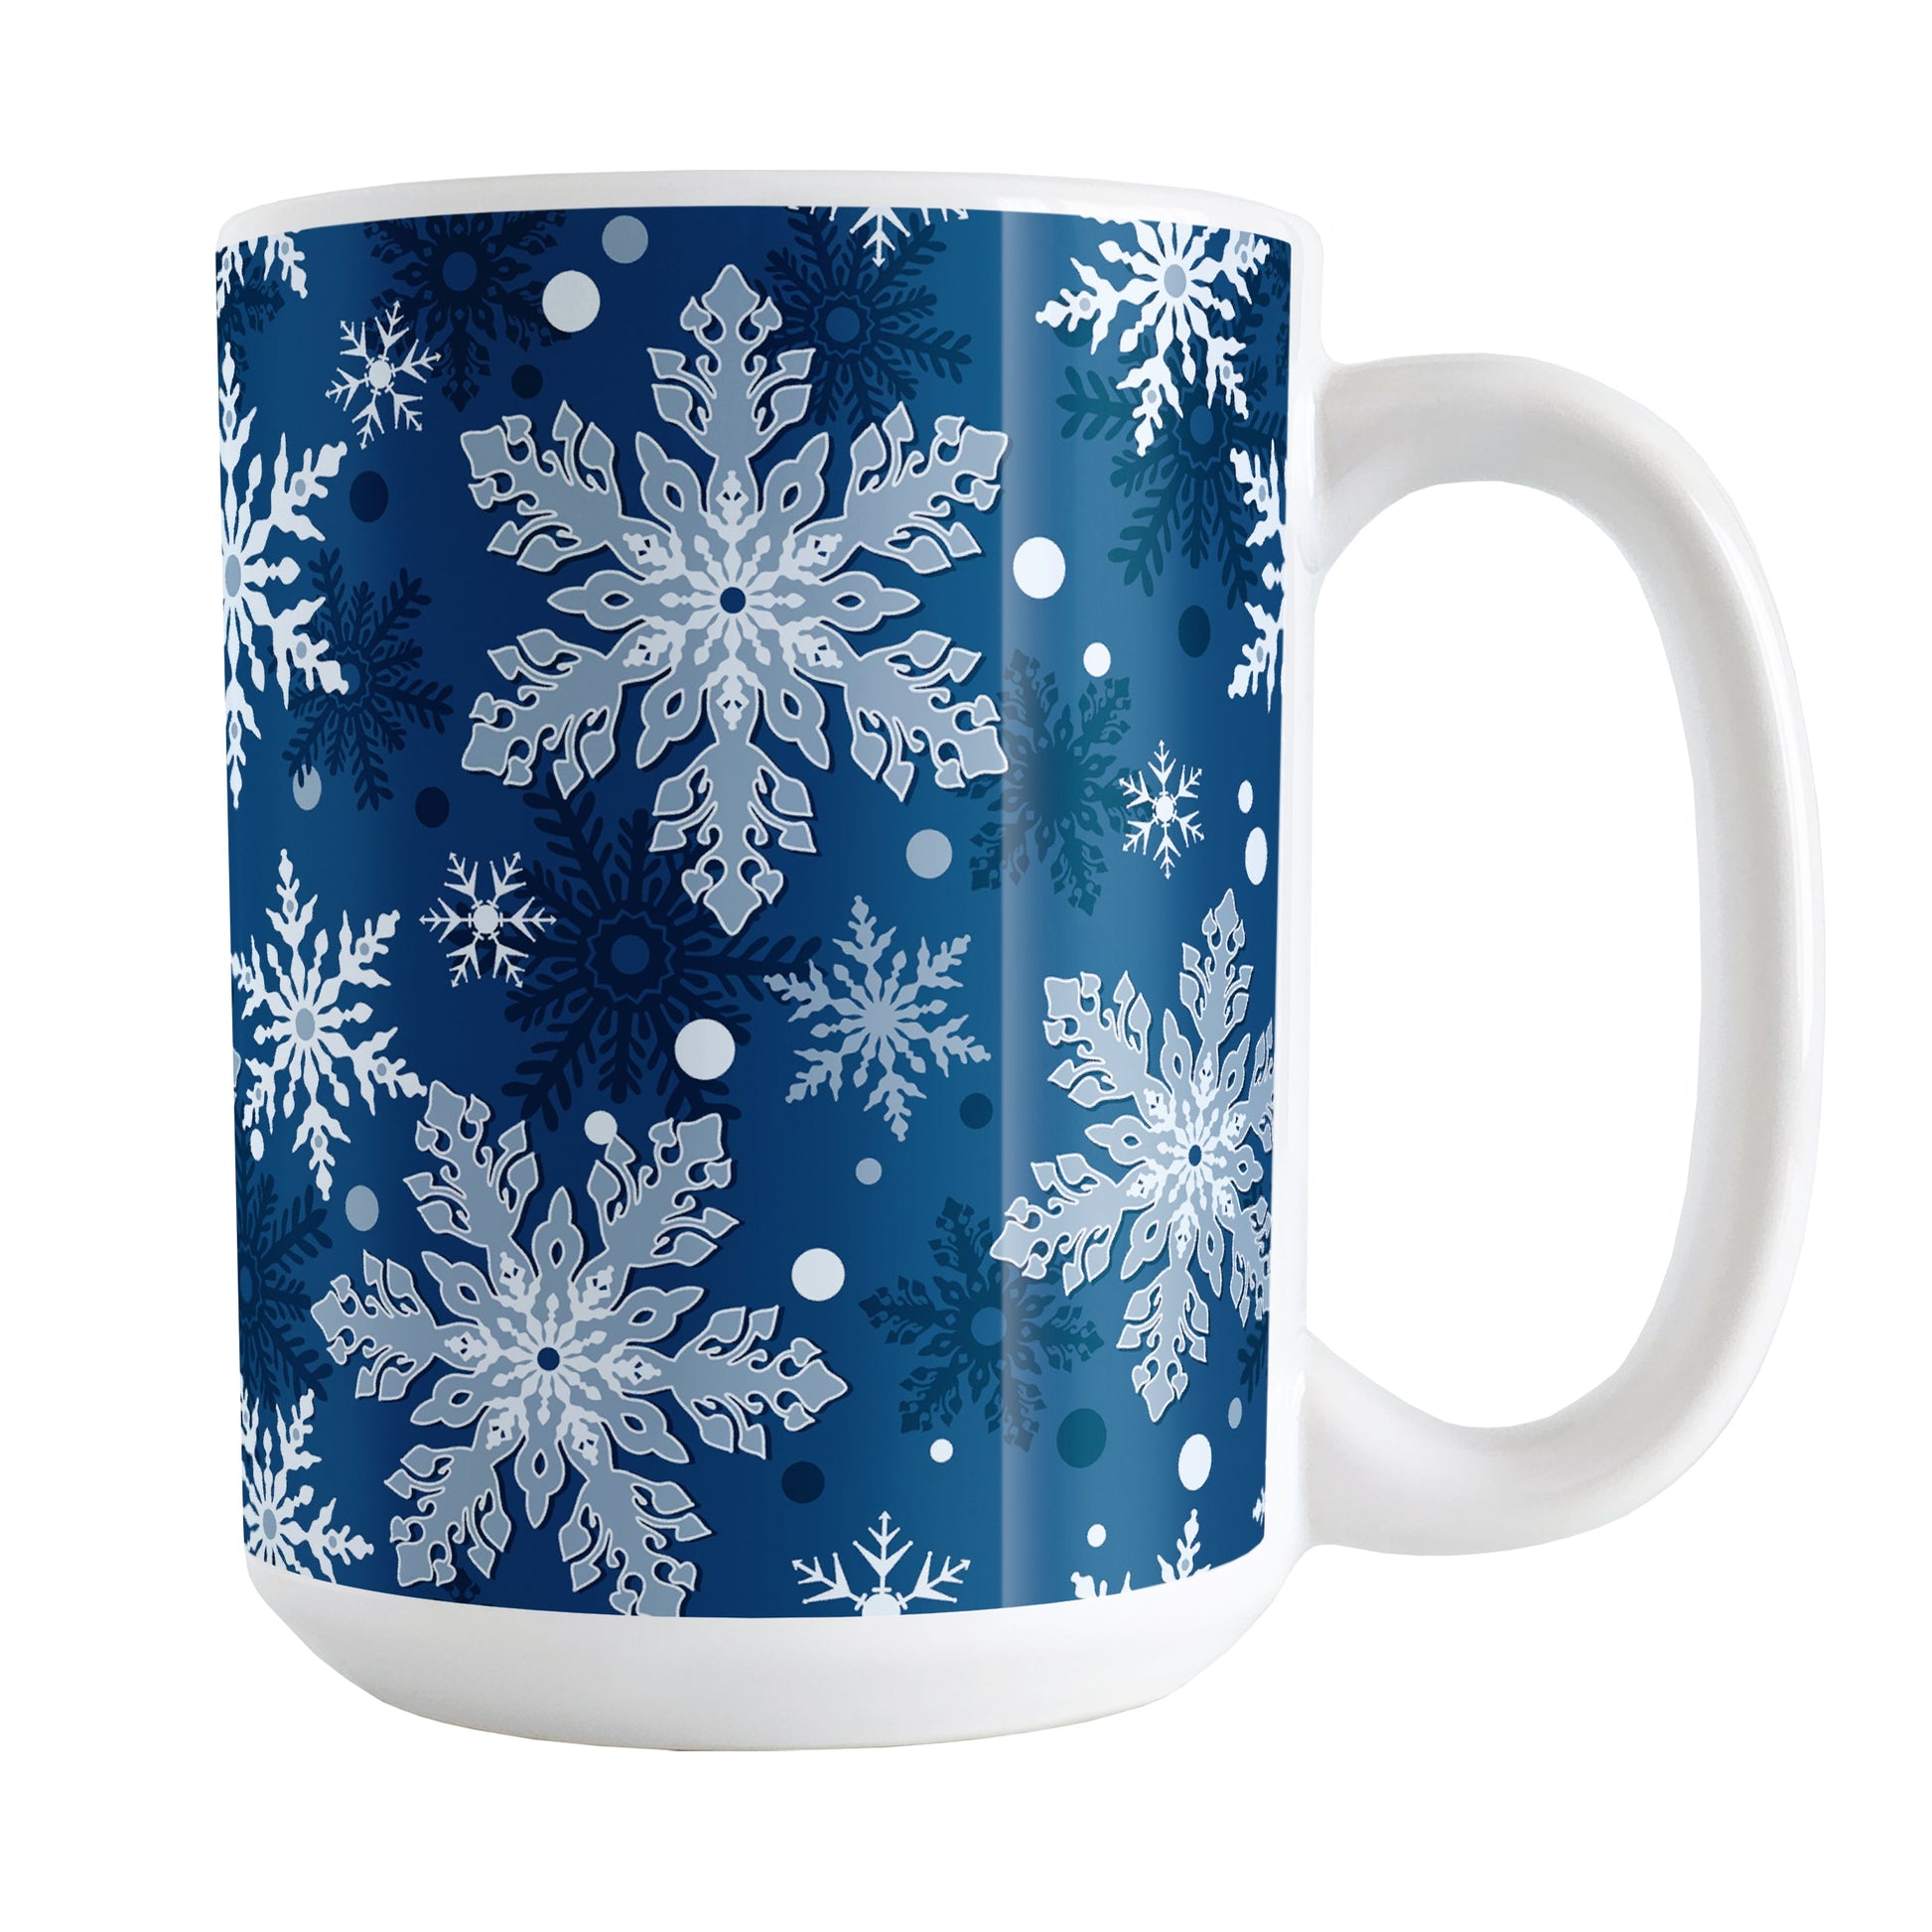 Classic Blue Snowflake Pattern Winter Mug (15oz) at Amy's Coffee Mugs. A ceramic coffee mug designed with a pattern of different shades of blue snowflakes over a classic blue background color that wraps around the mug.